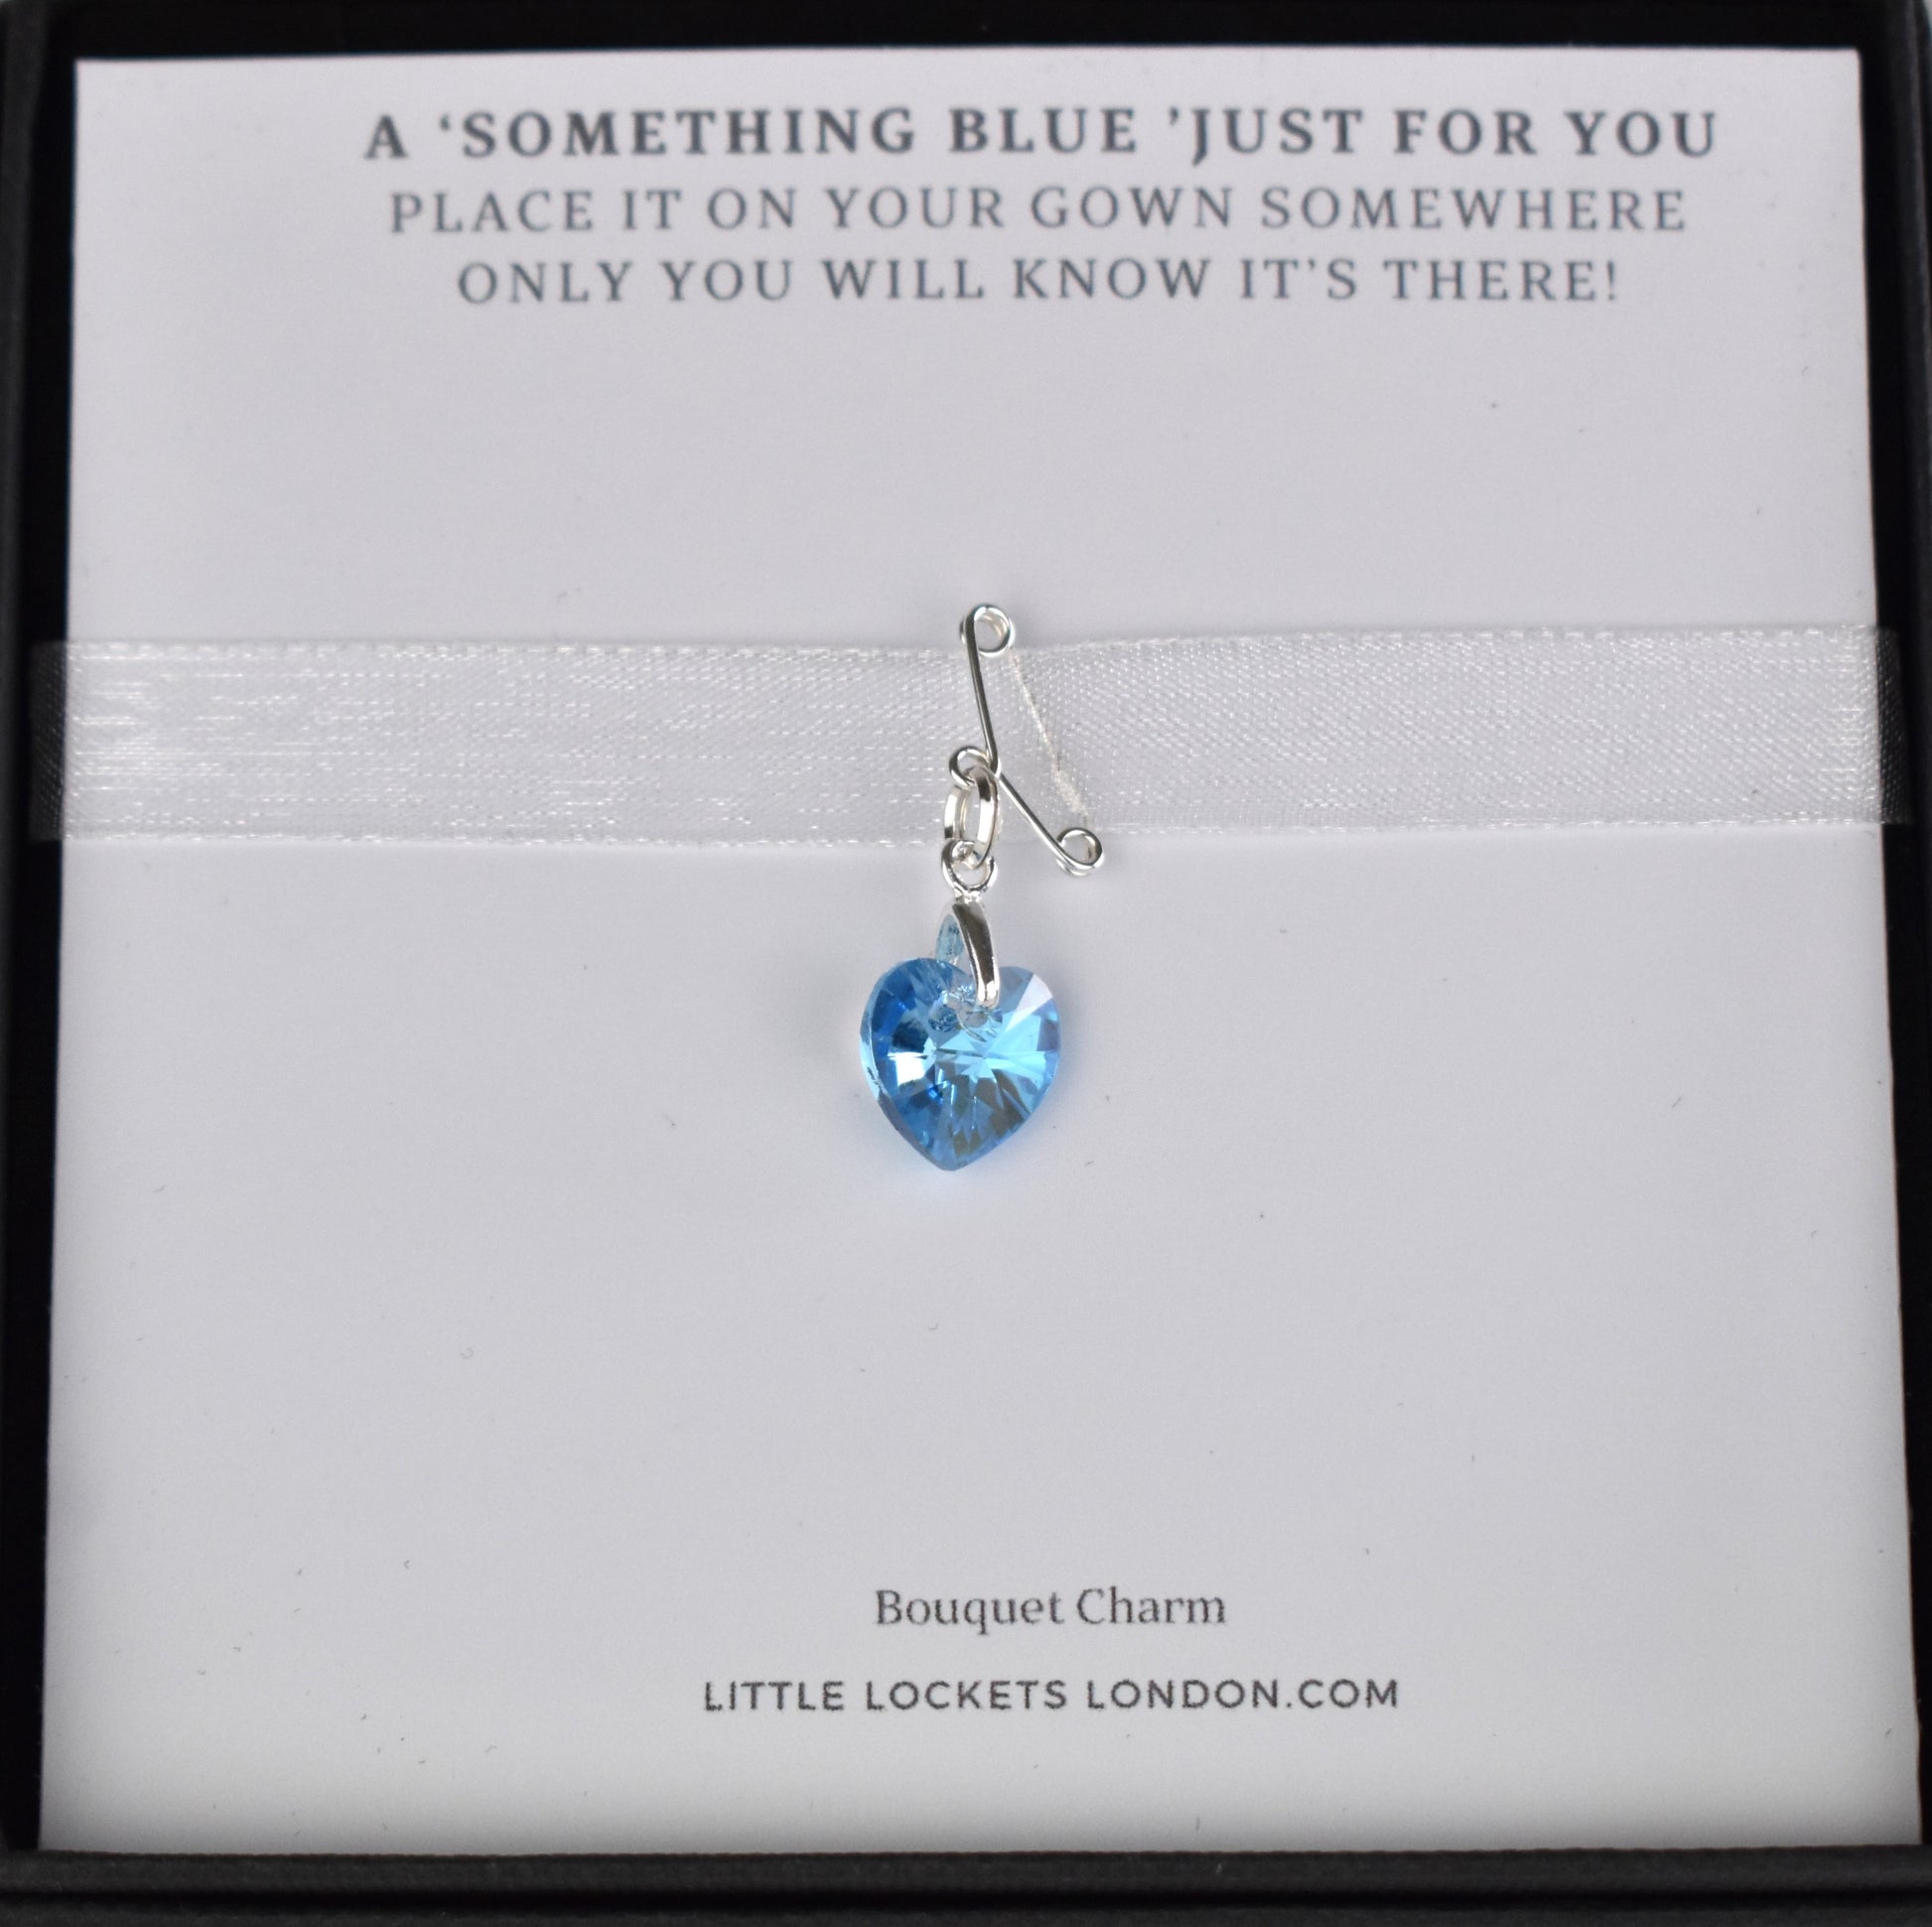 A tiny sterling silver pin holds a suspended blue crystal heart to form a secret something blue. Mounted on card with the rhyme "A something blue just for you, place it on your gown somewhere, only you will know it's there!